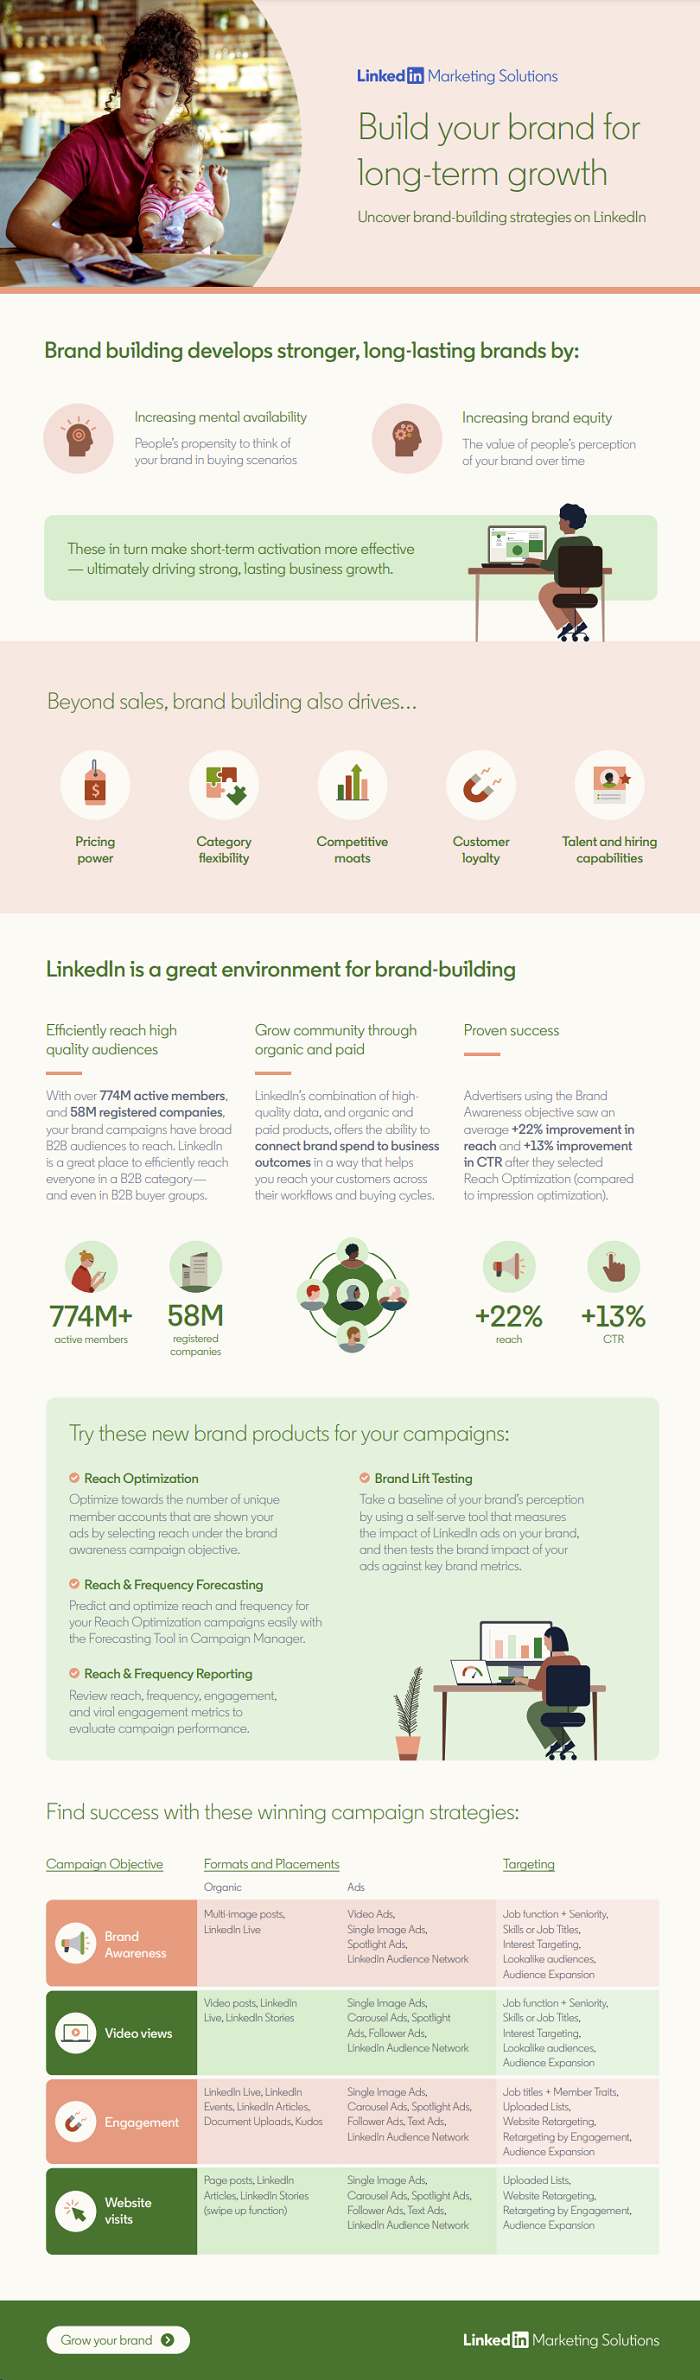 how to maximize your brand building efforts on linkedin infographic